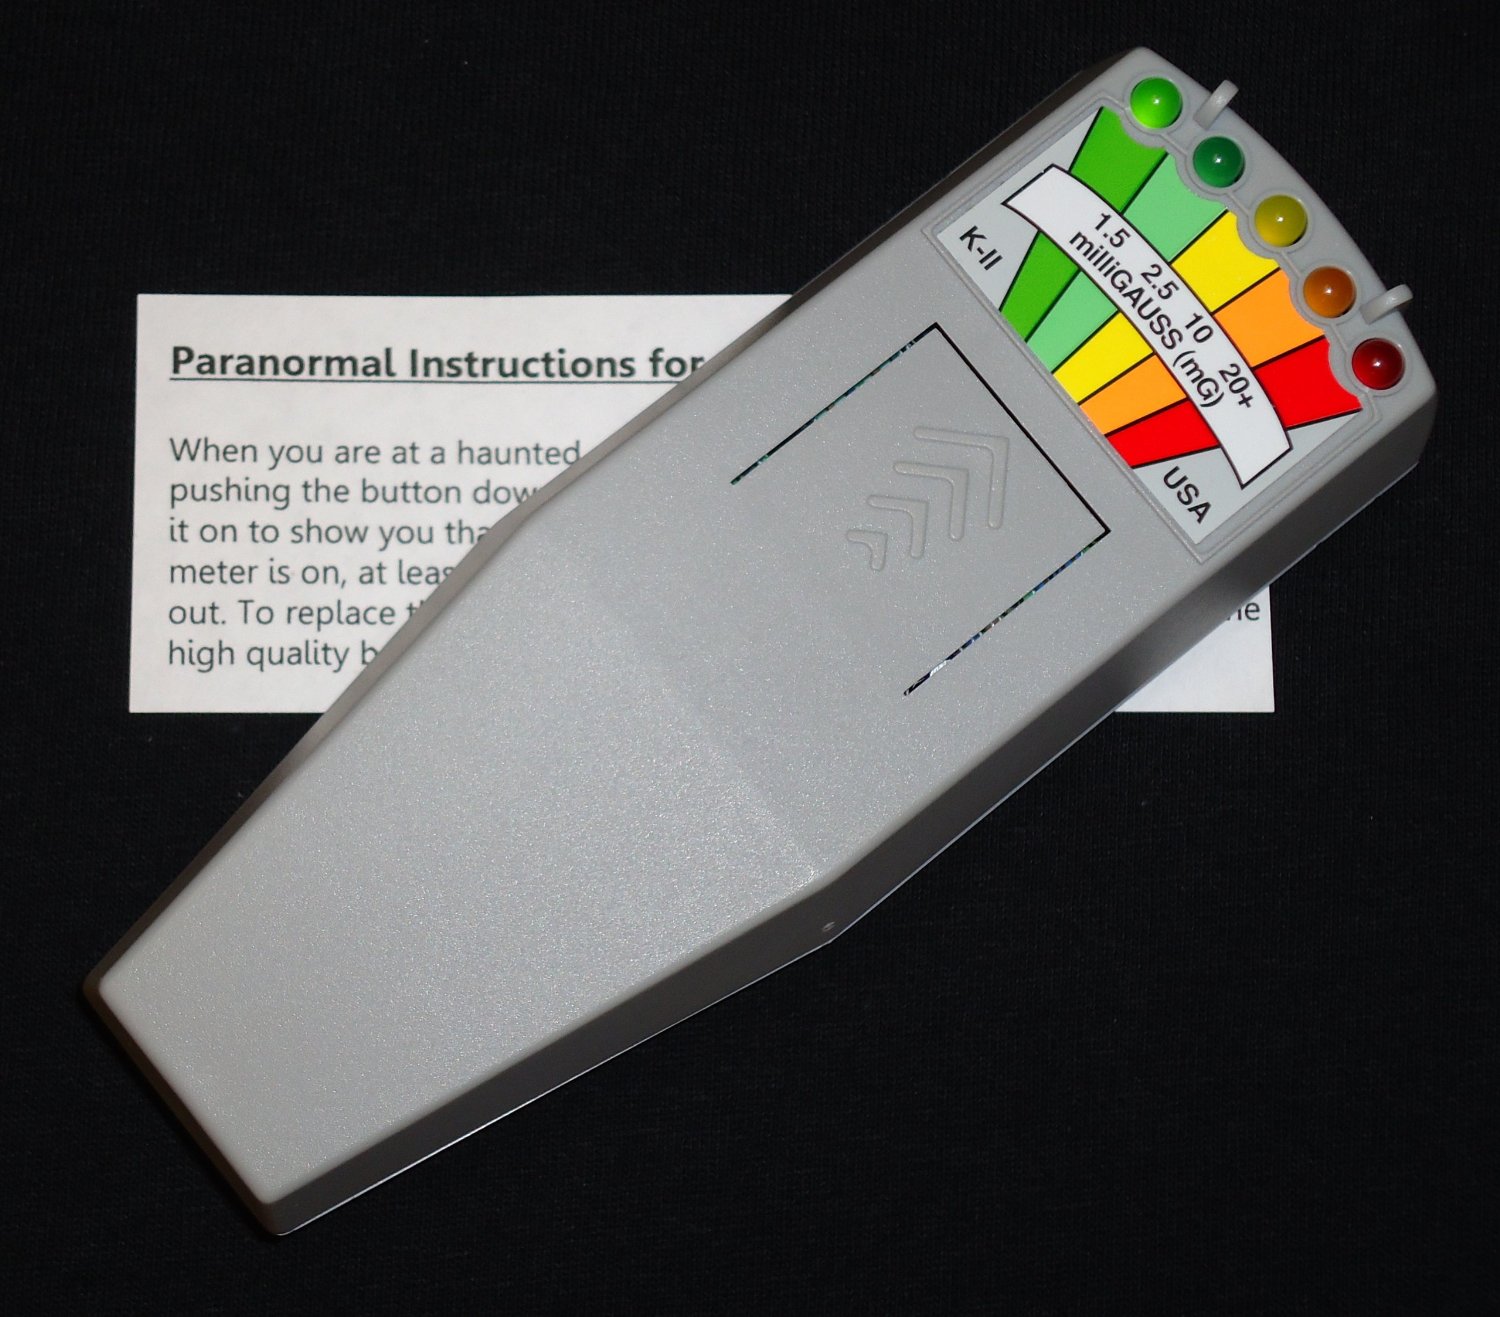 KII EMF Ghost Meter Deluxe with Paranormal Users Manual